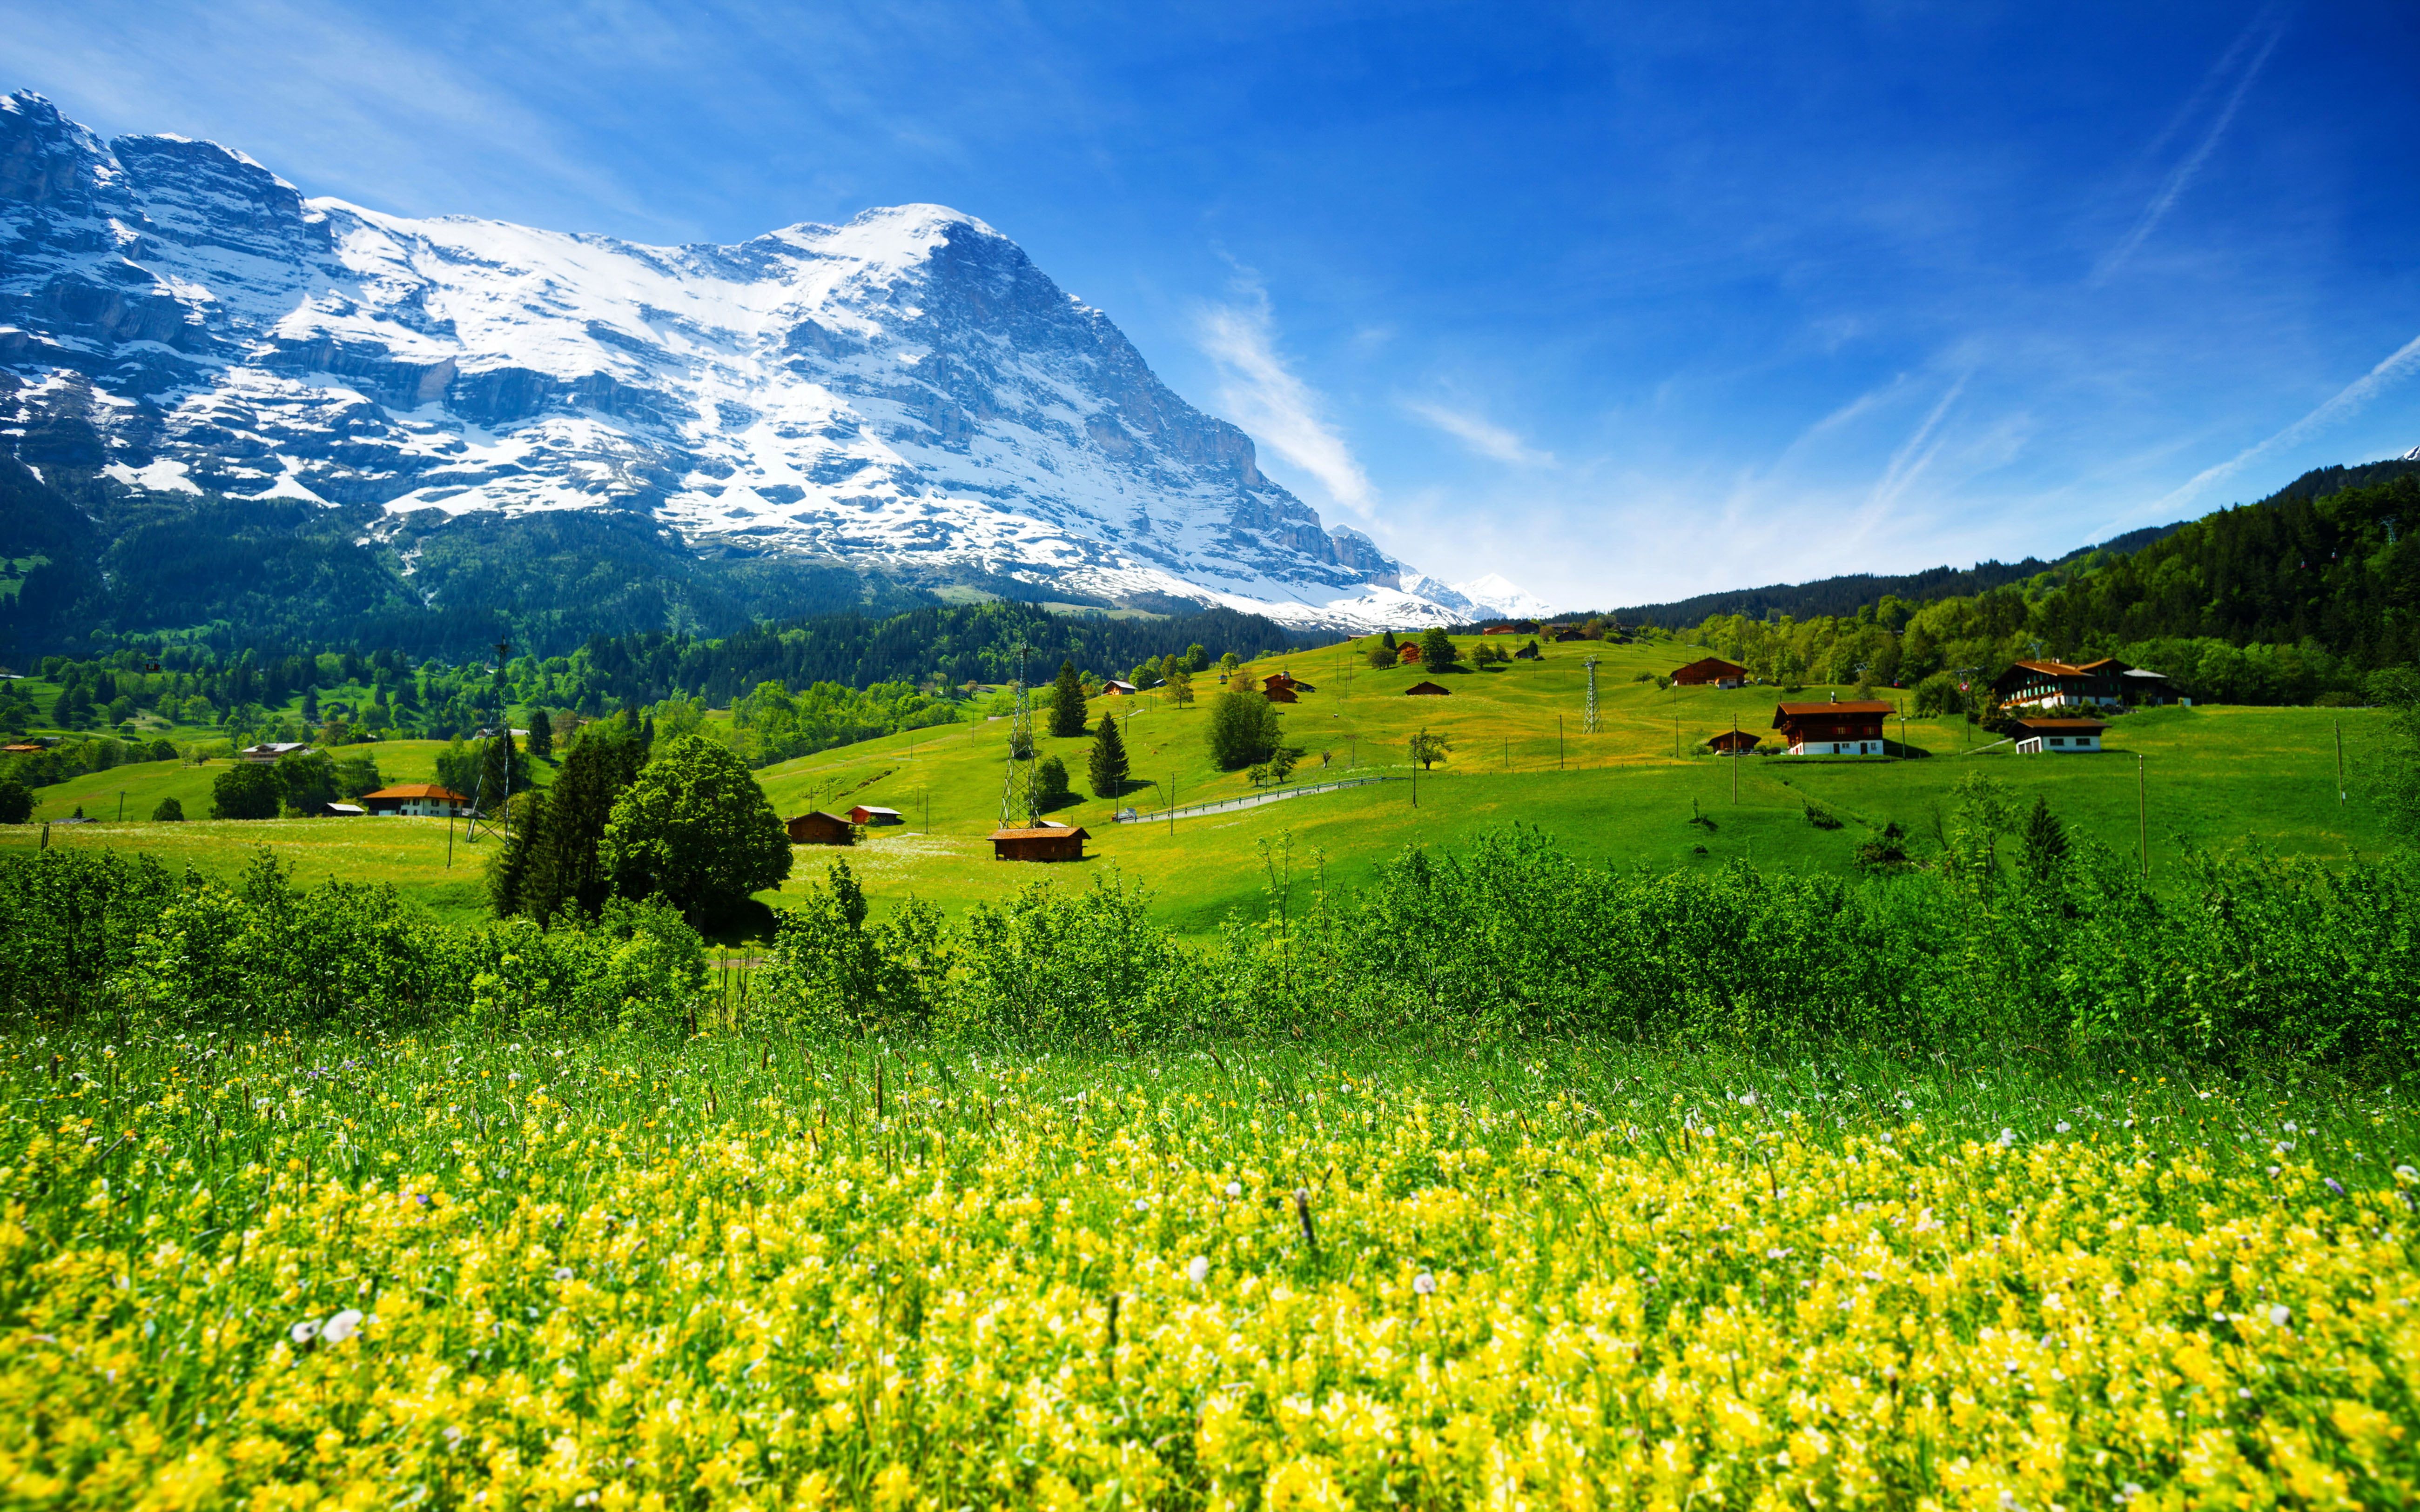 Mountain Landscape Nature Wallpapers